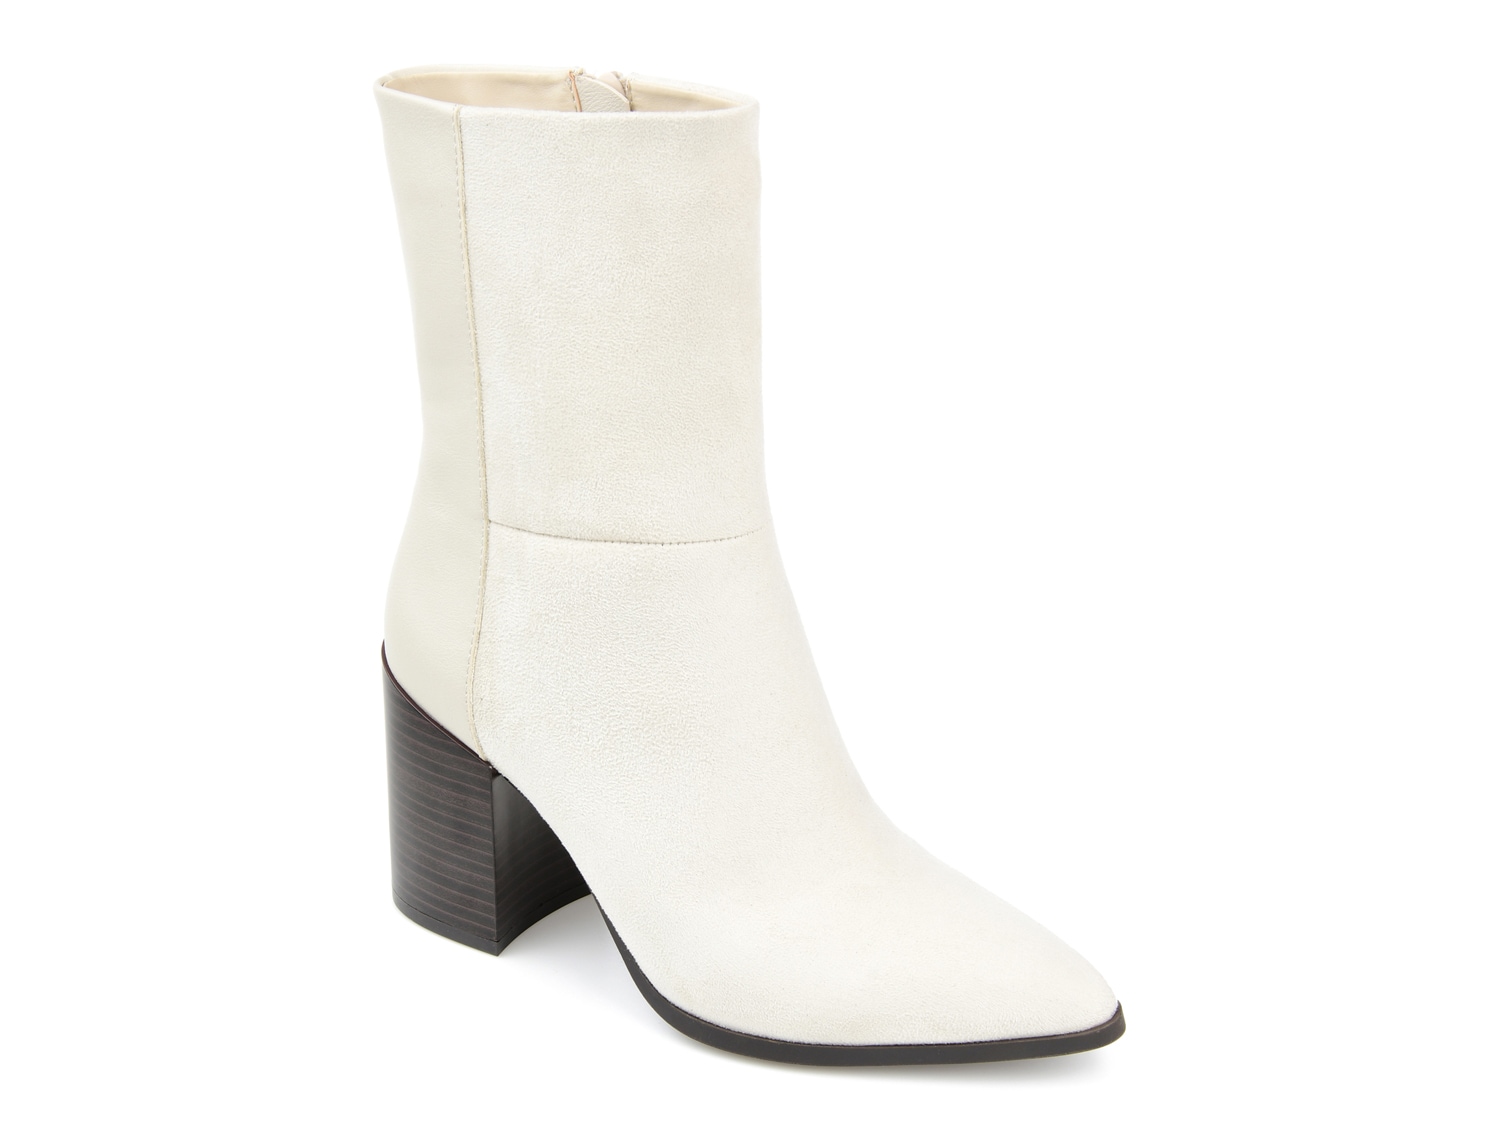 Journee Collection Sharlie Bootie - Free Shipping | DSW